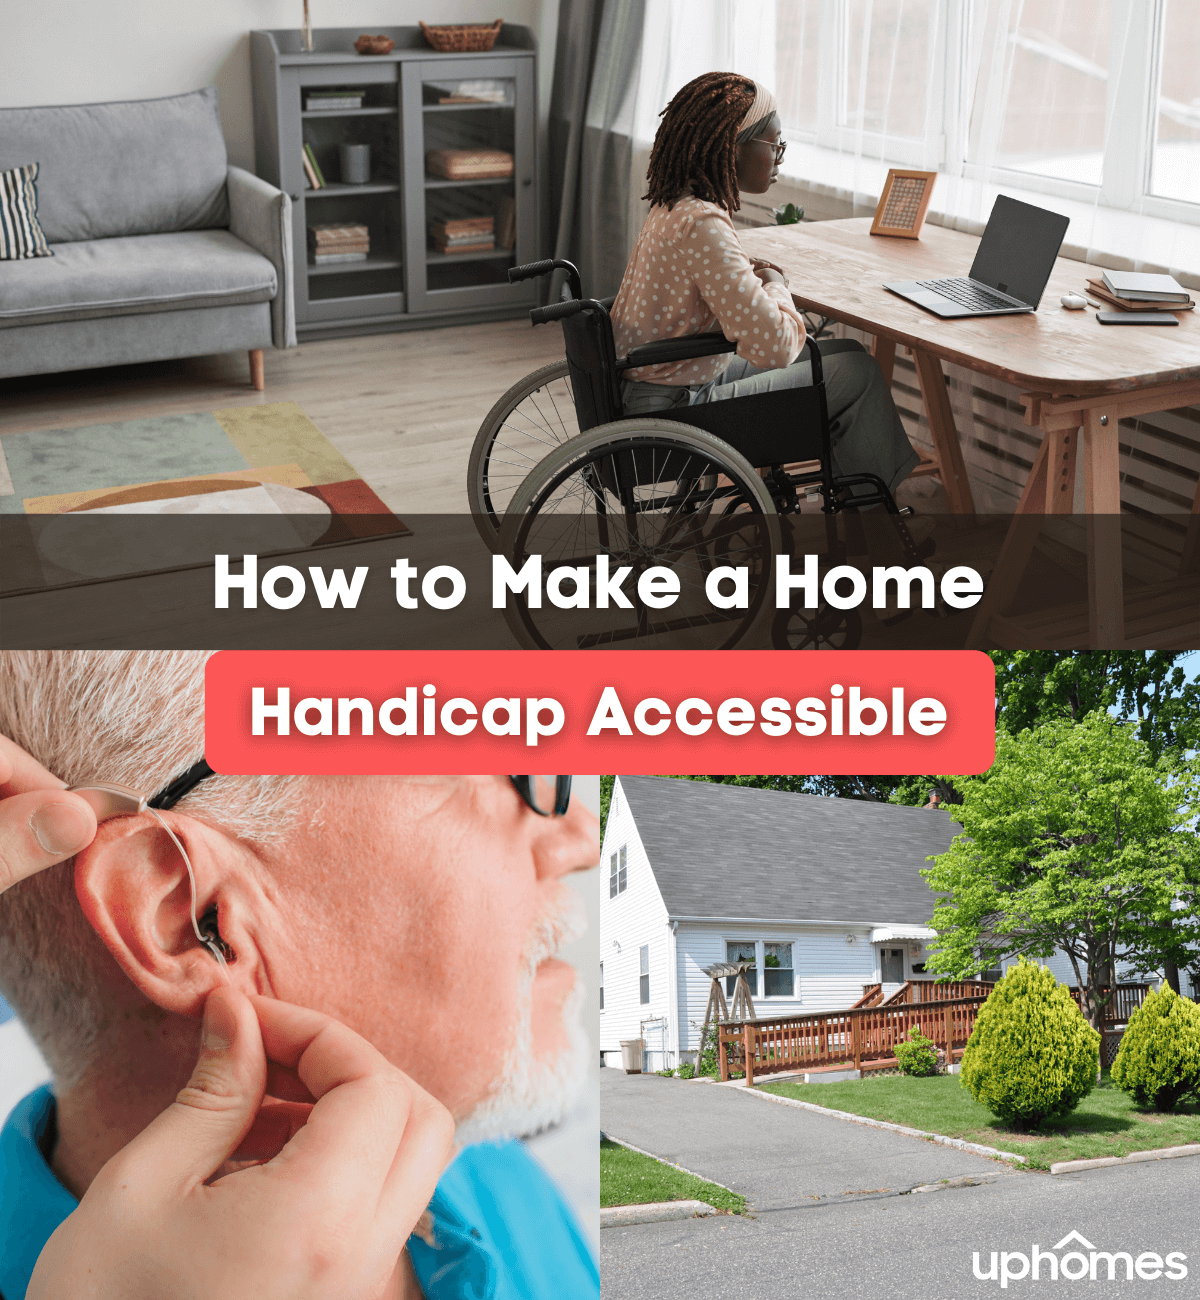 How to Make a Home Handicap Accessible - Handicapped Accessible homes